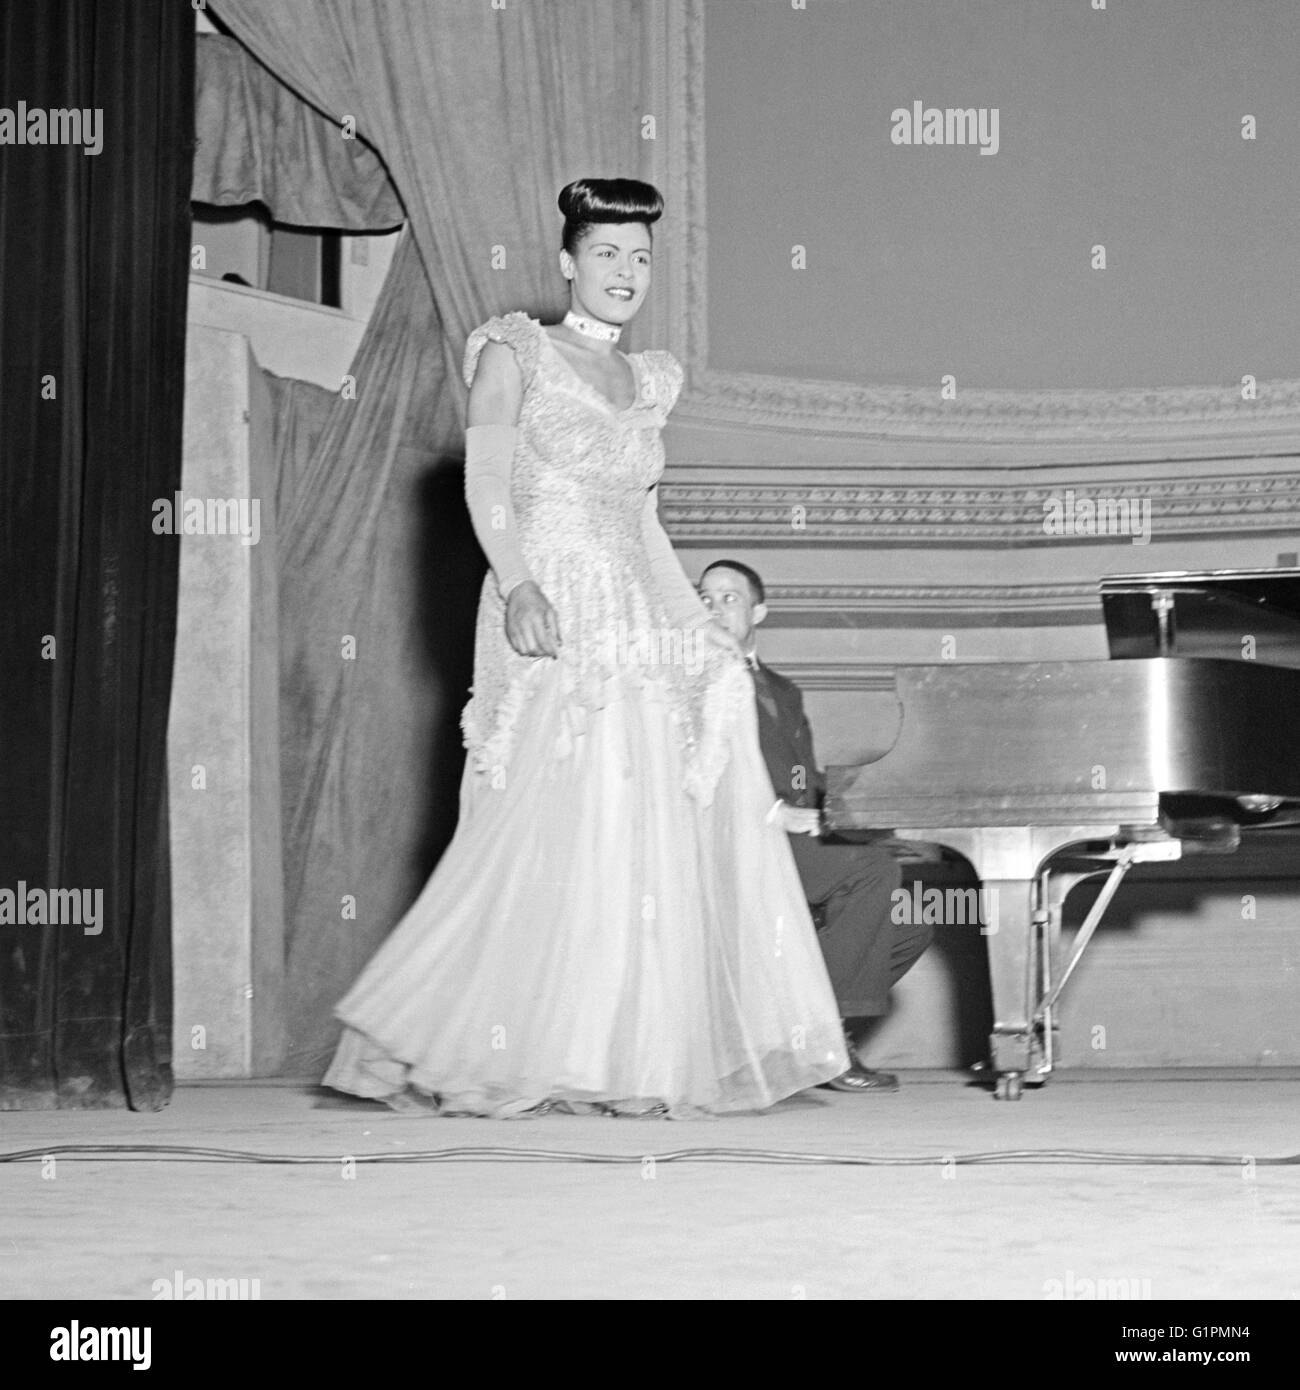 BILLIE HOLIDAY (1915-1959). American singer. On stage at Carnegie Hall in New York City. Photograph by William P. Gottlieb, c1947. Stock Photo